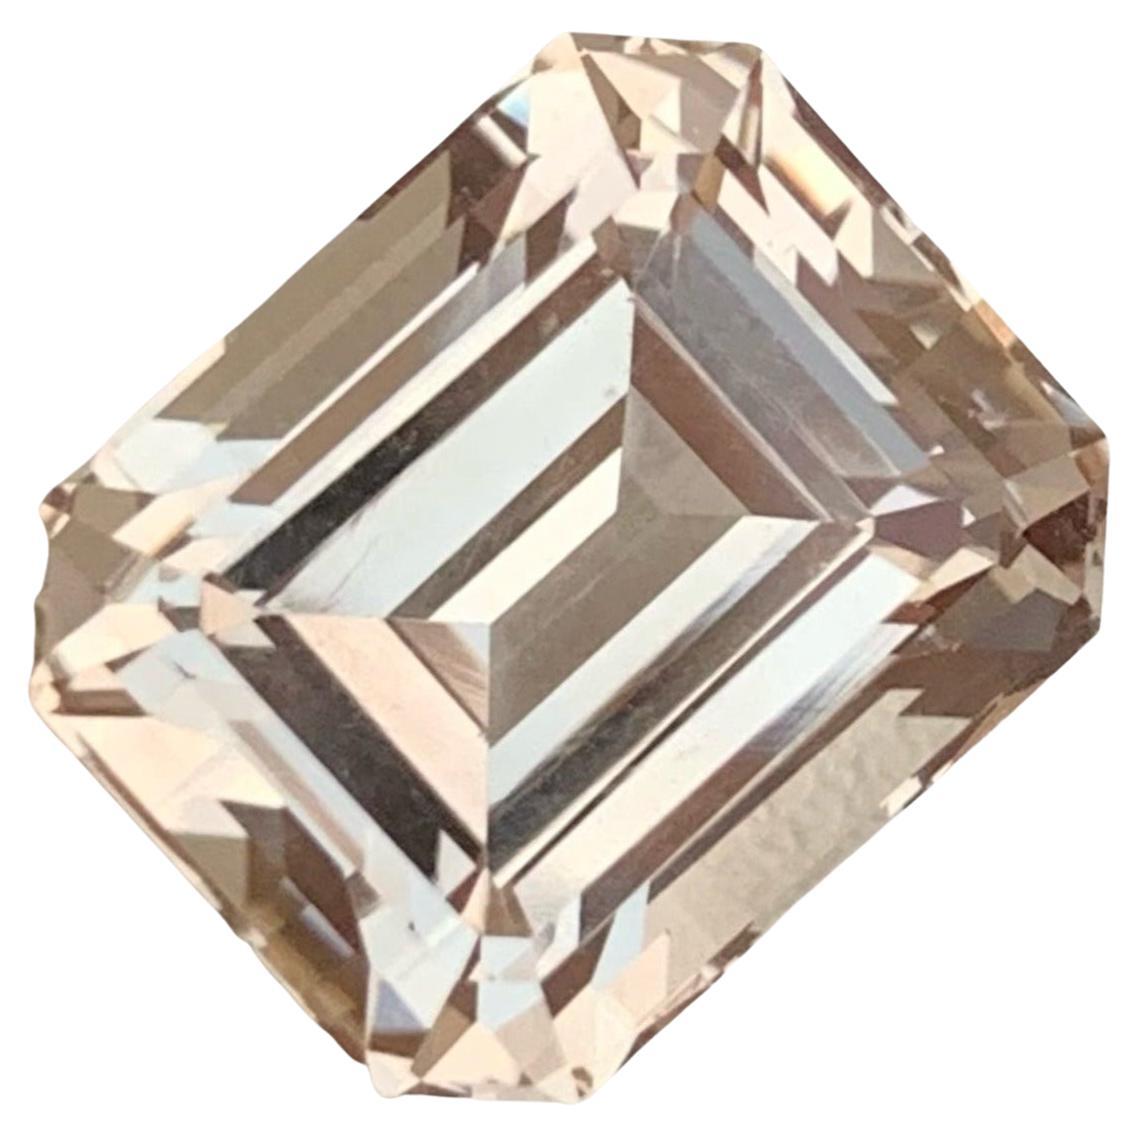 Flawless Imperial Topaz 11.40 carats Emerald Cut Loose Natural Pakistani Gem For Sale